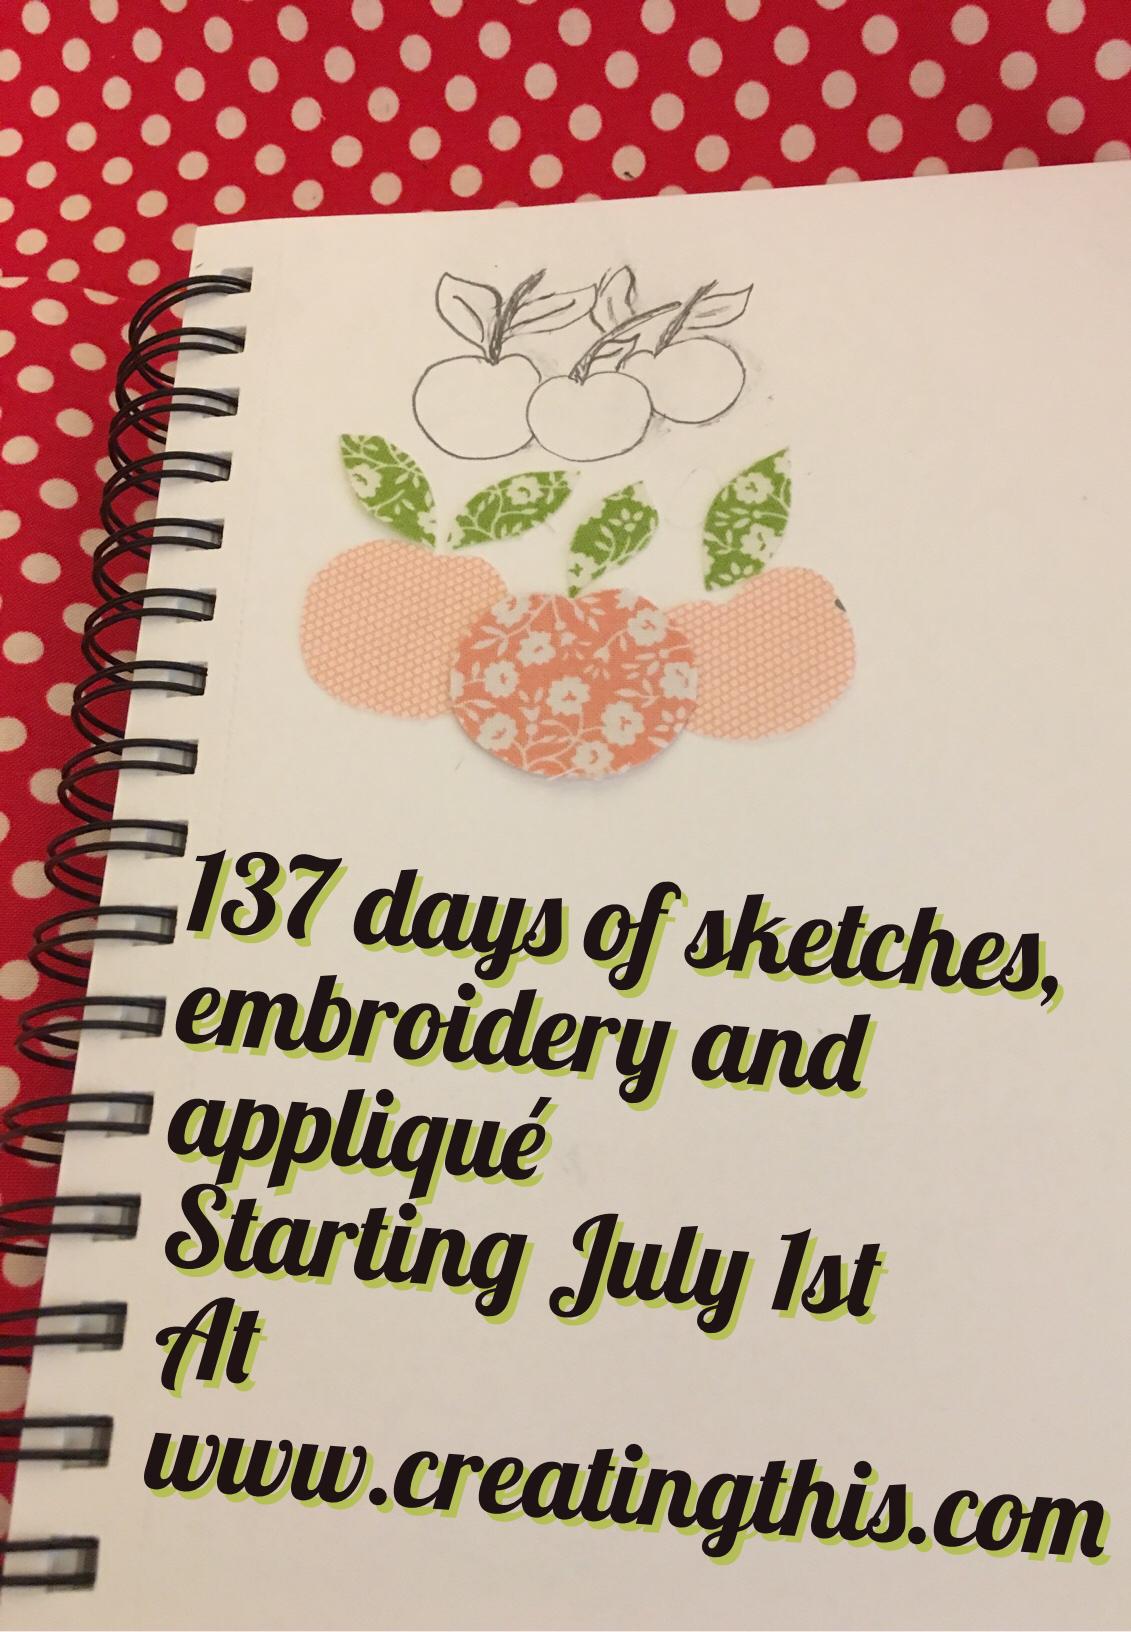 137 Days of Sketching, Applique and Embroidery